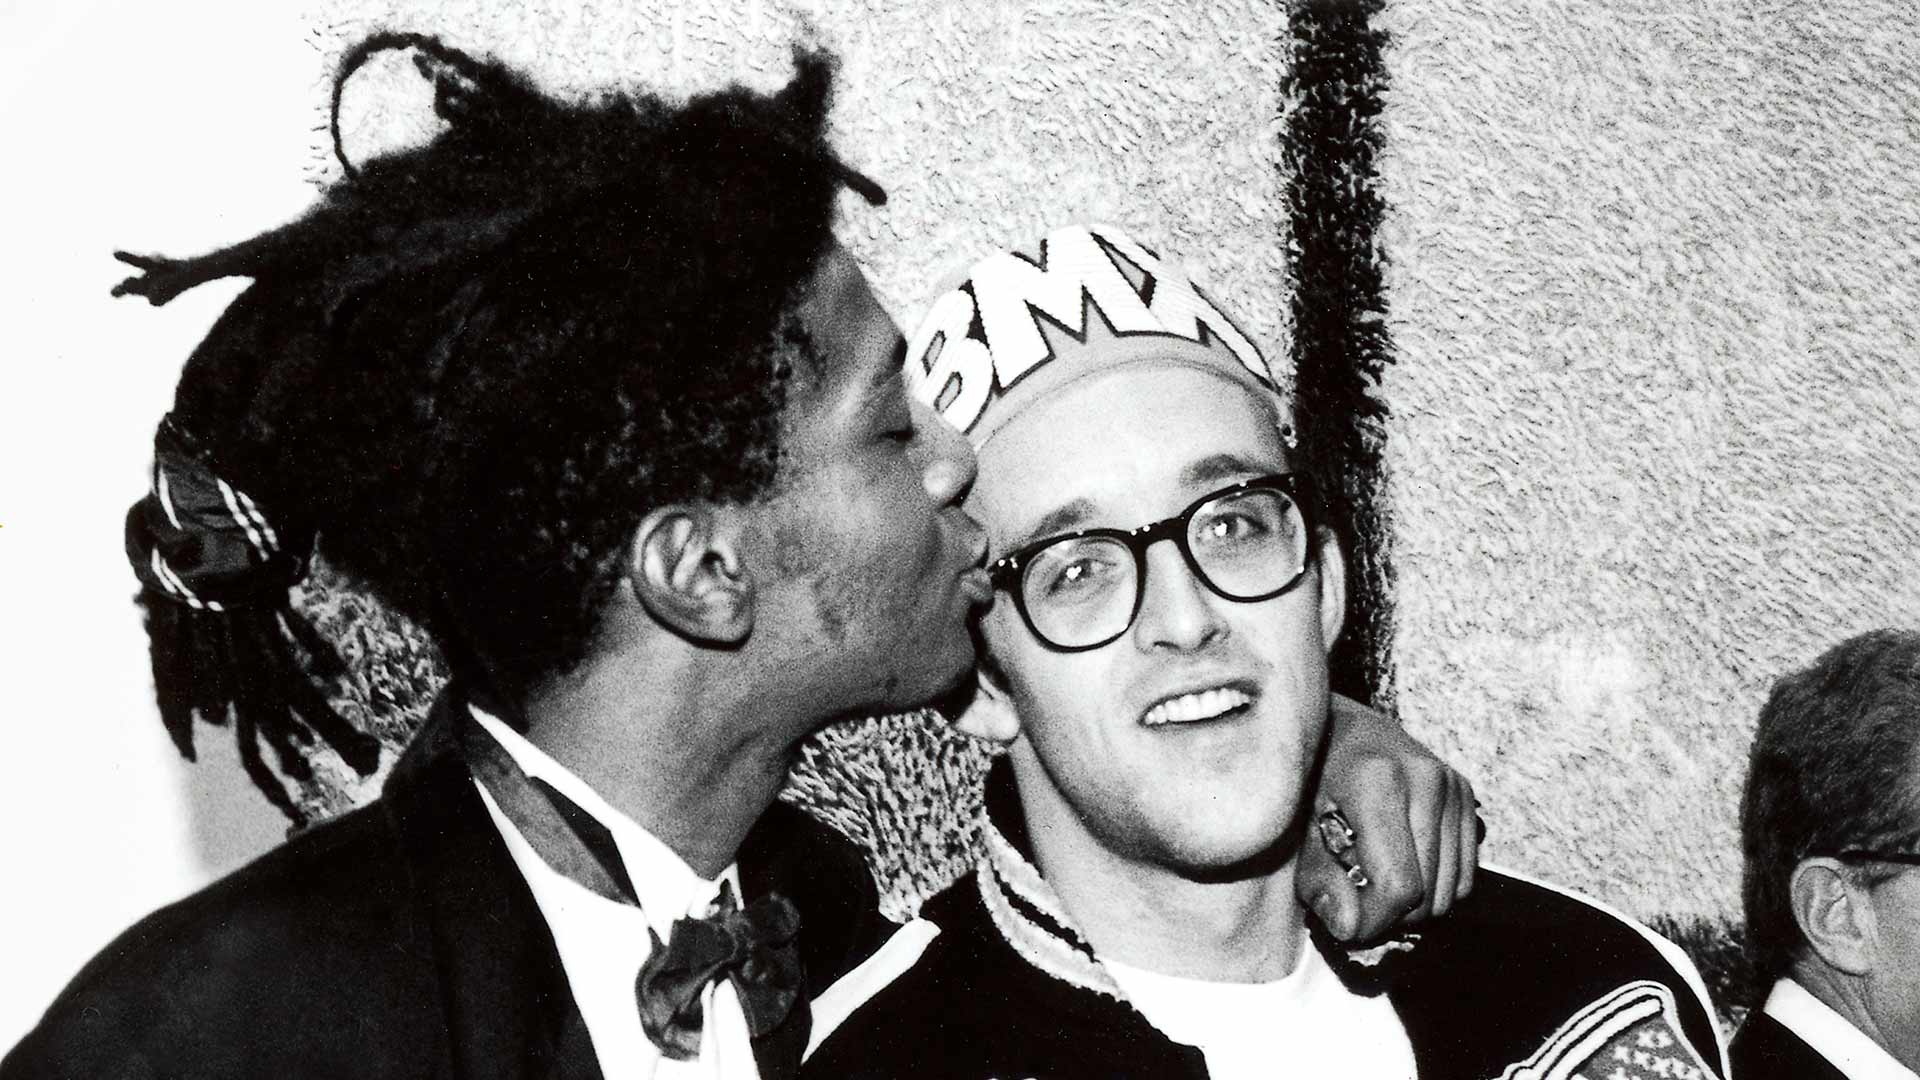 A World-First Exhibition of Works by Keith Haring and Jean-Michel Basquiat Is Coming to the NGV